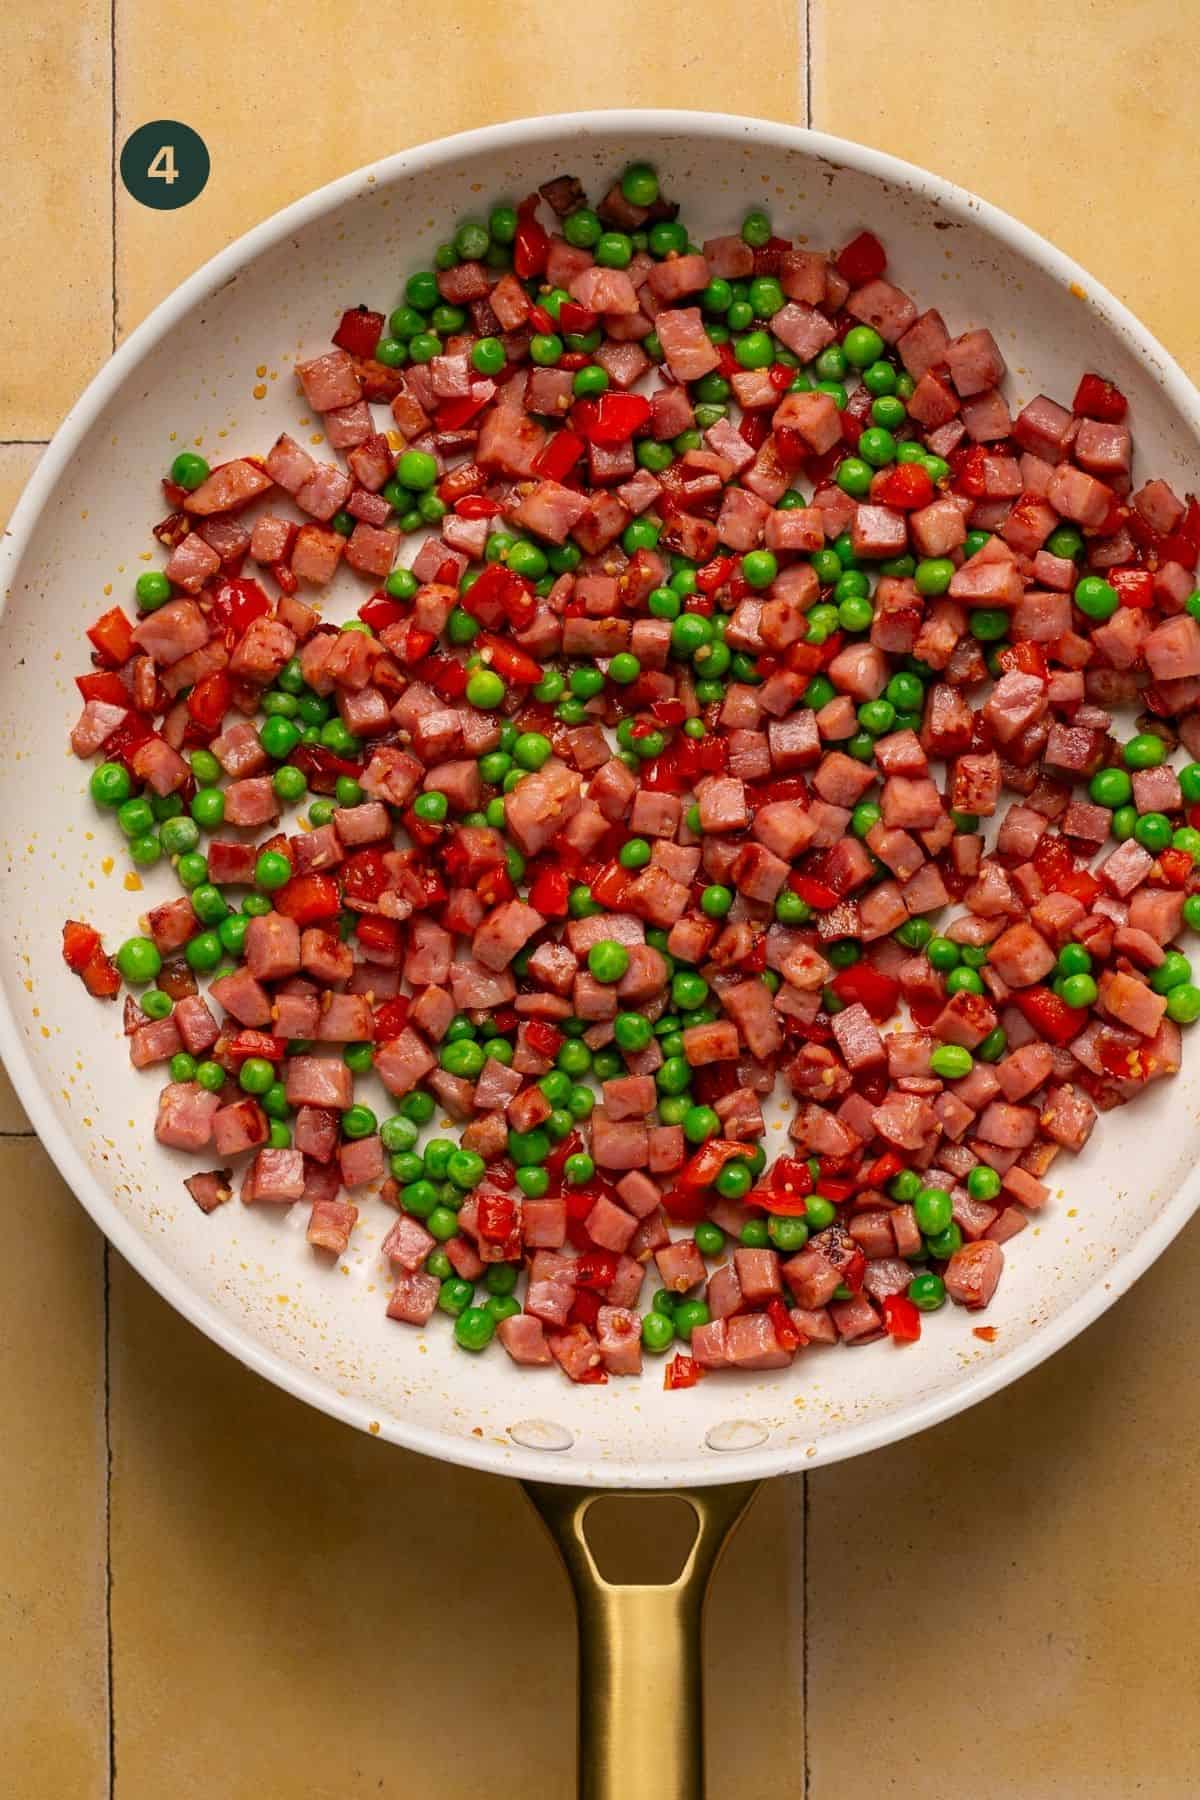 Peas added to ham and bell peppers in a pan.